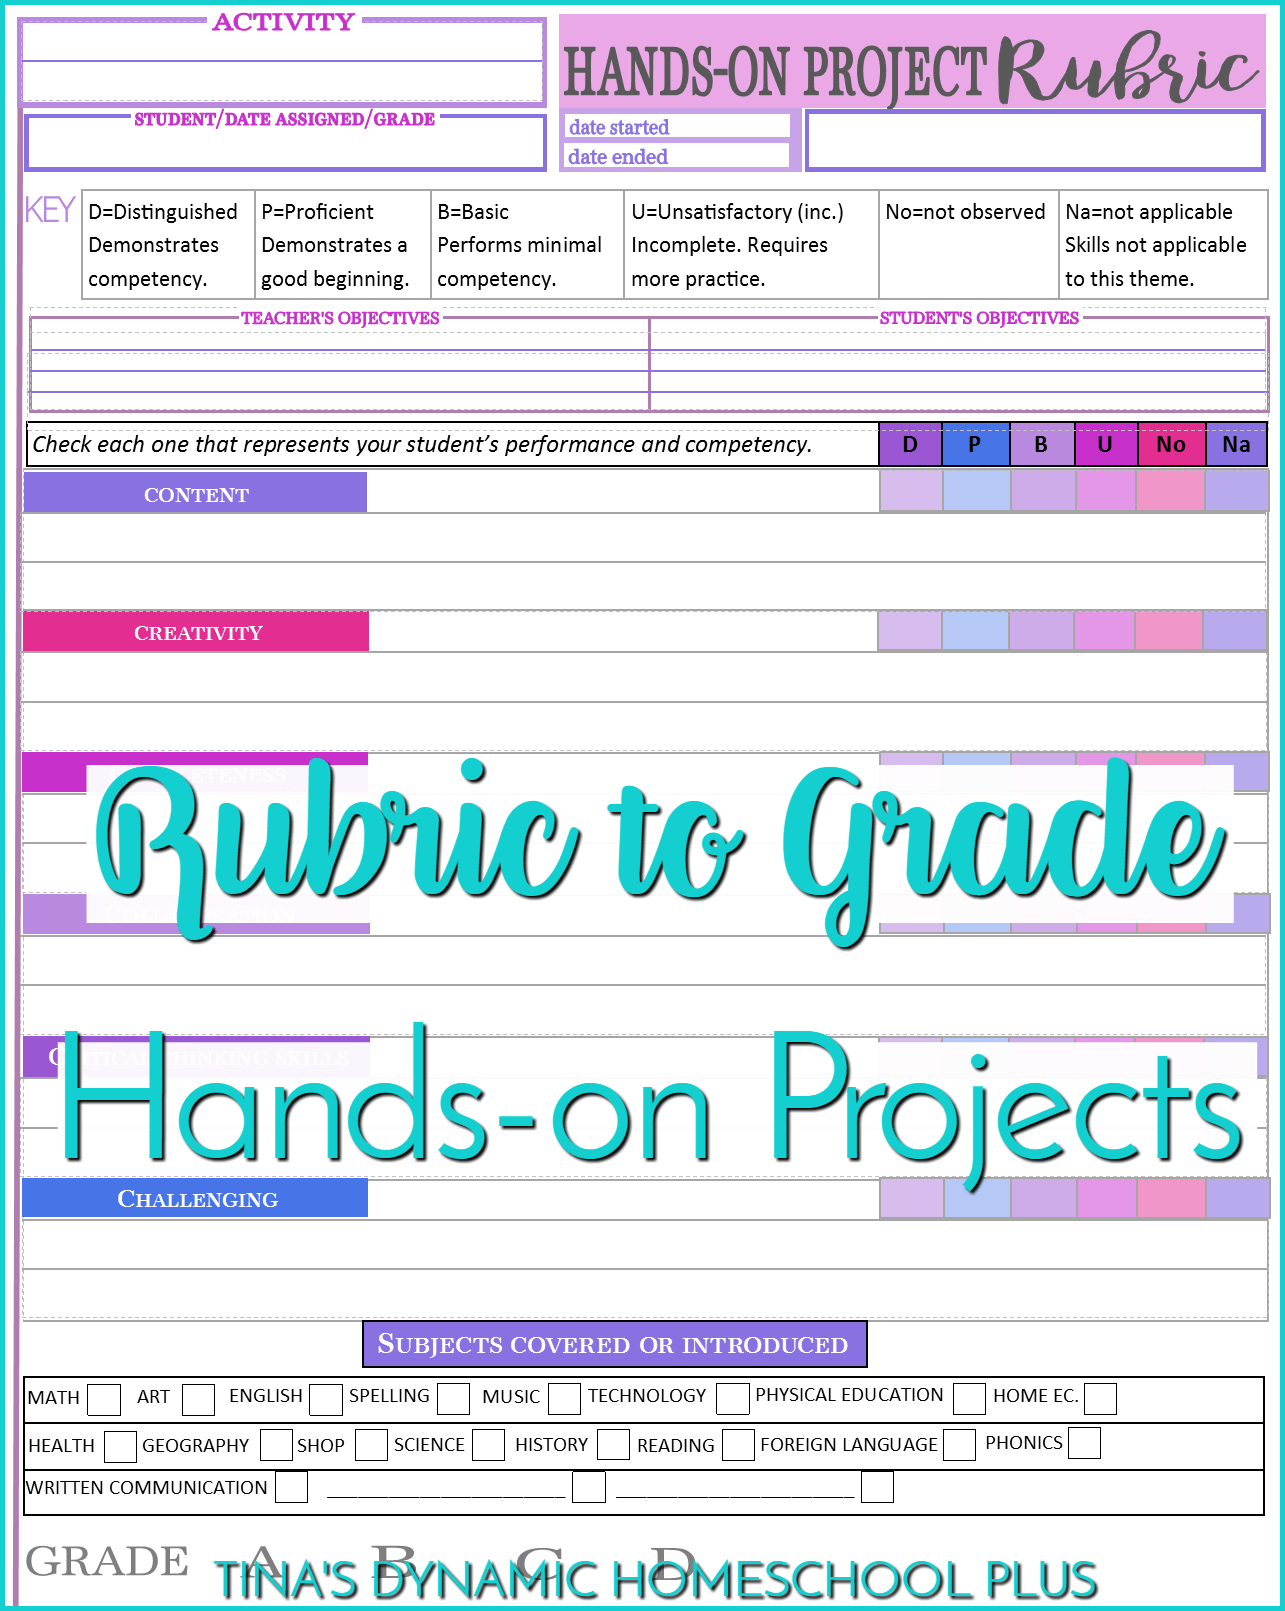 How to Grade Hands-on Homeschool Activities and Projects (Free Rubric for Grading). Don’t shy away from having fun in your homeschool or including needed hands-on activities because you’re afraid you won’t be able to grade them. Grab the tips here AND grab a free rubric for grading hands-on homeschool activities. CLICK HERE!